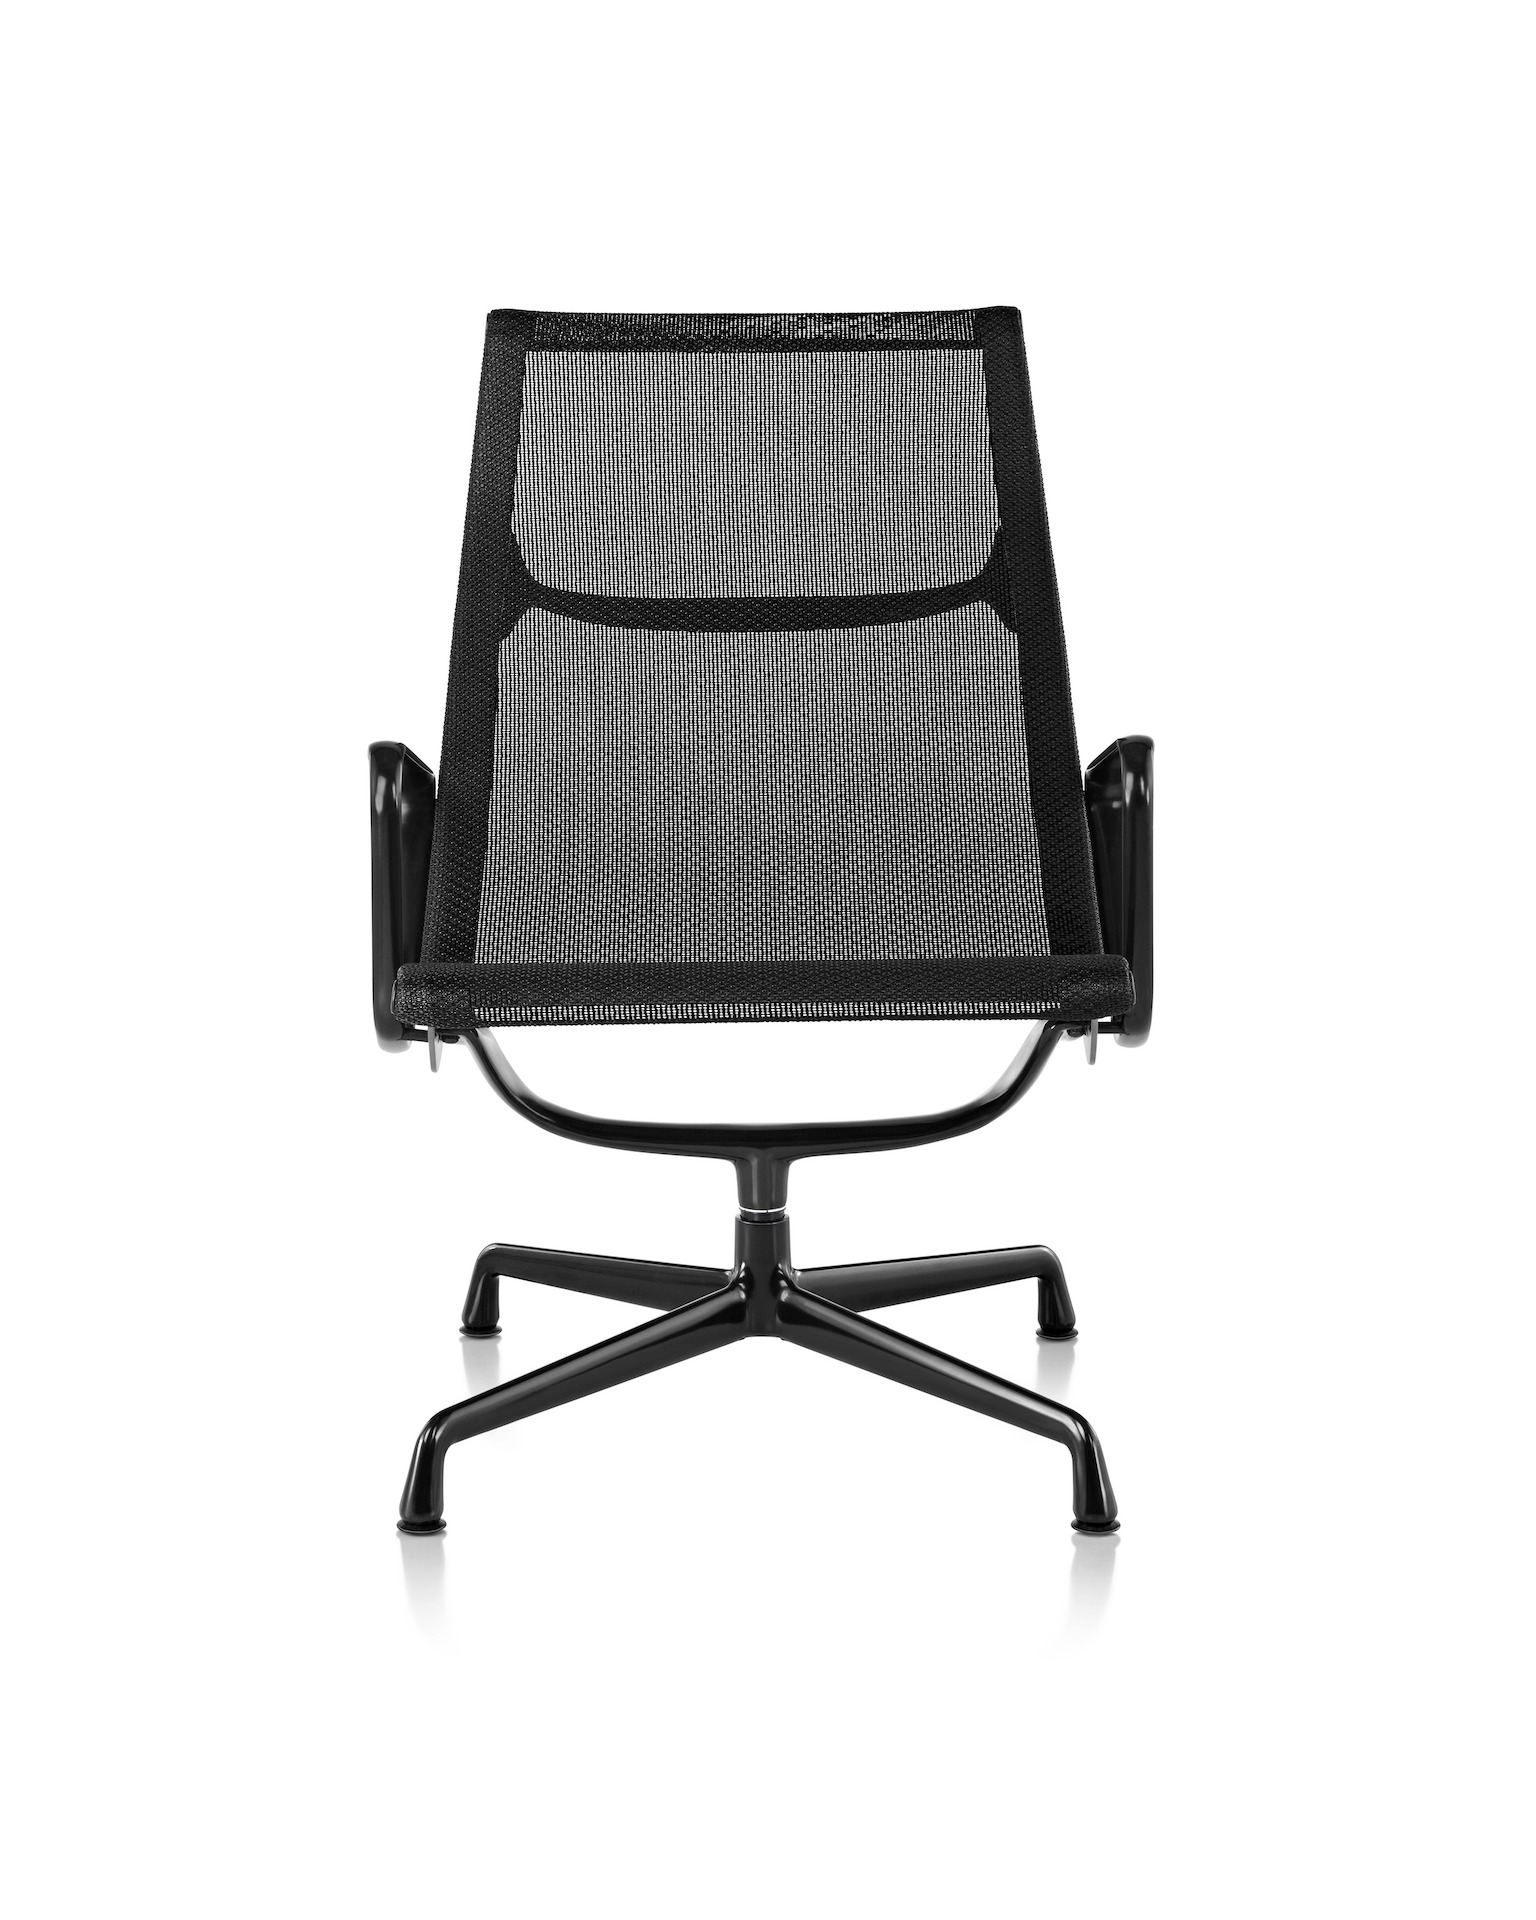 Eames Aluminum Group Lounge Chair - 3D Product Models - Herman Miller